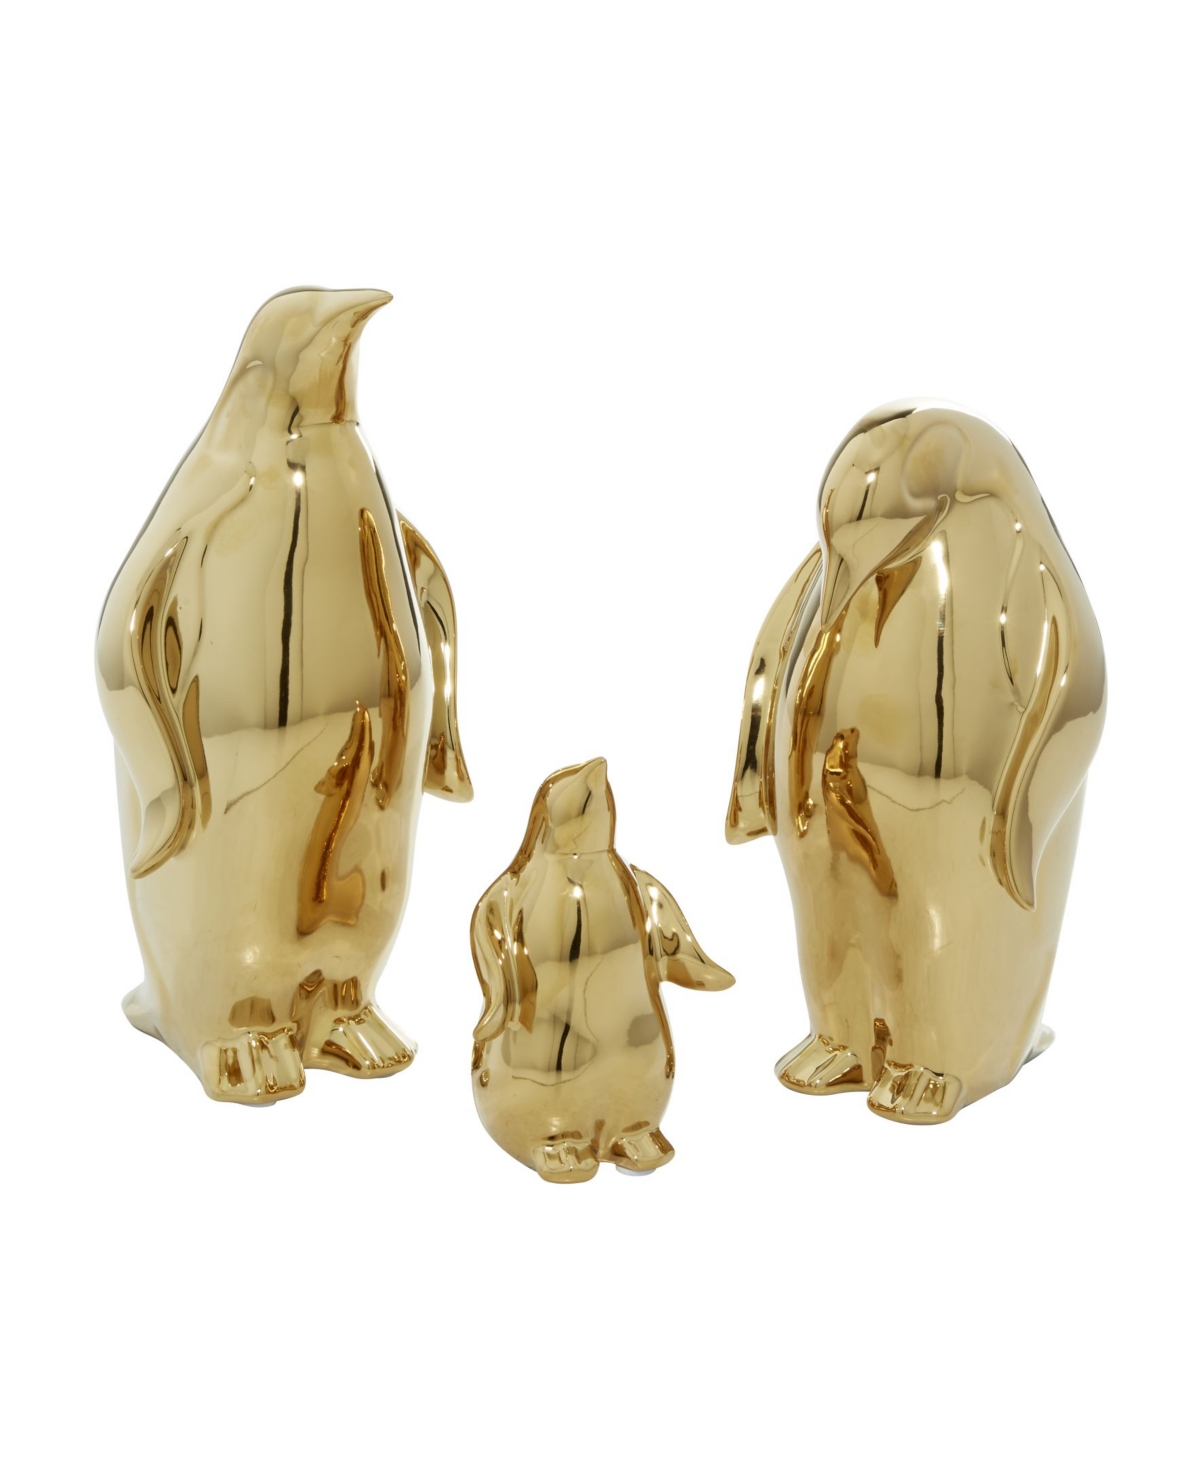 Rosemary Lane Glam Sculpture, Set Of 3 In Gold-tone